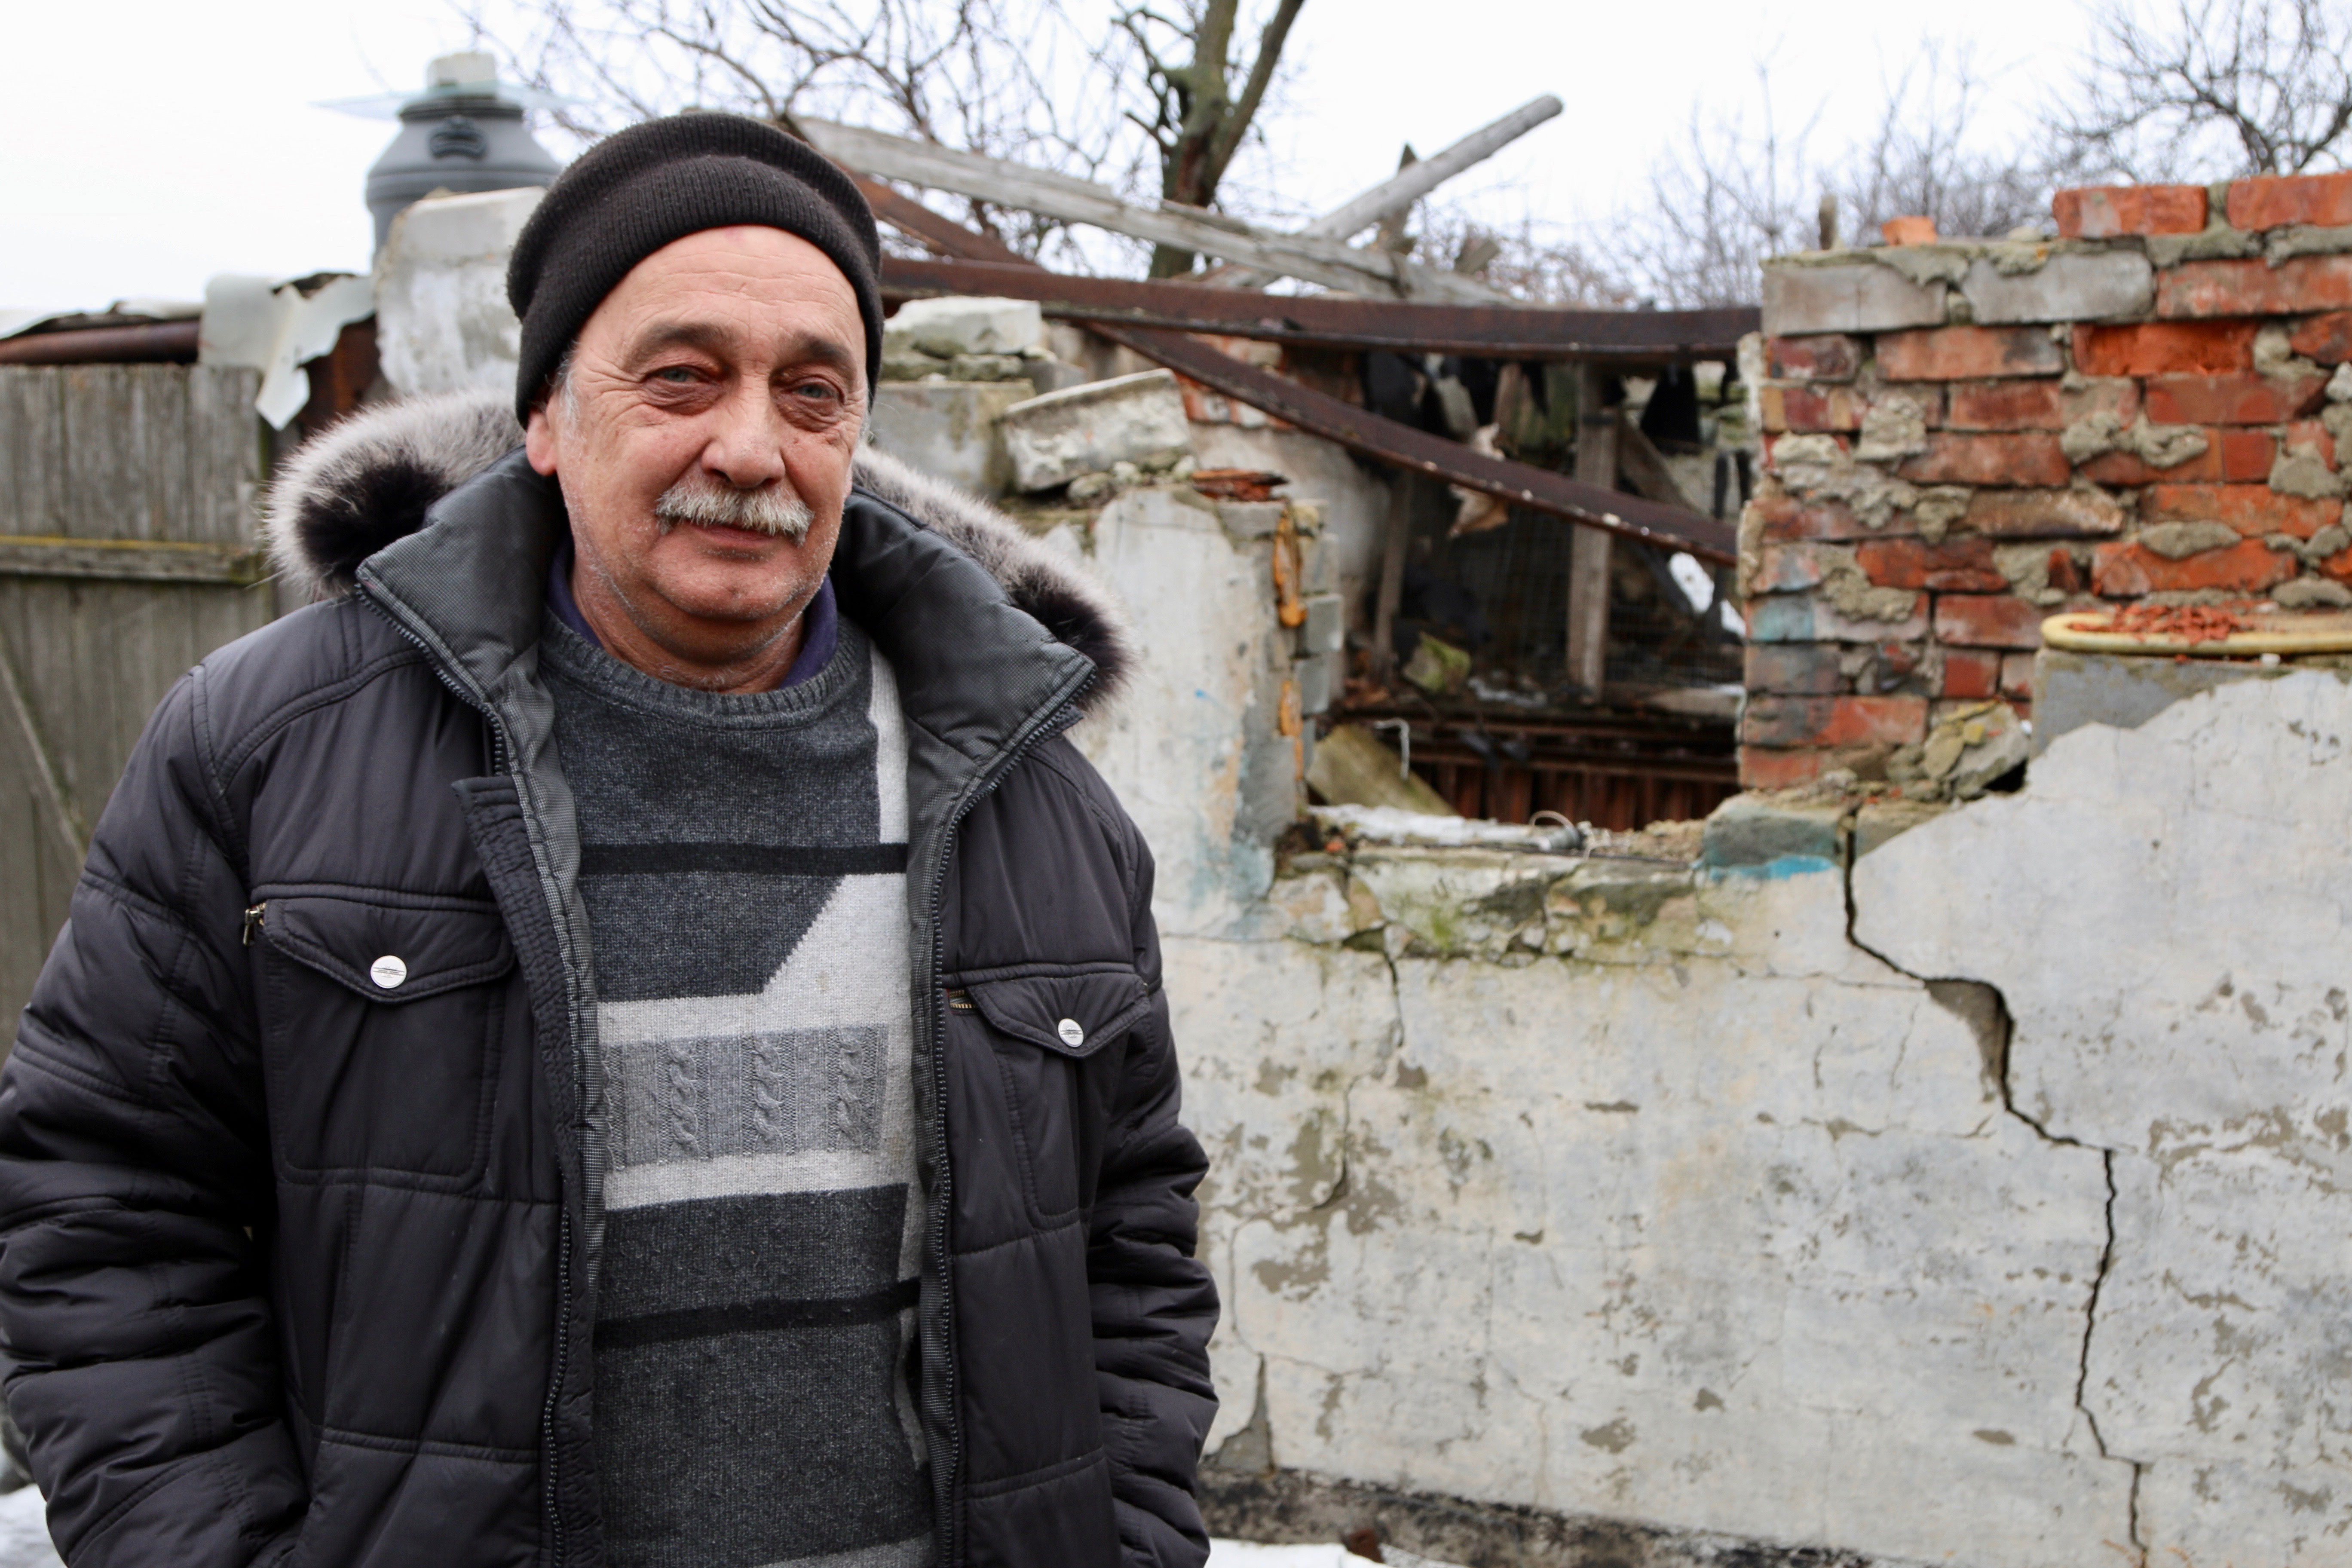 Valera Dudochkin, 53, a Russian, stands before his artillery-damaged home in eastern Ukraine. (Photos: Nolan Peterson/The Daily Signal)